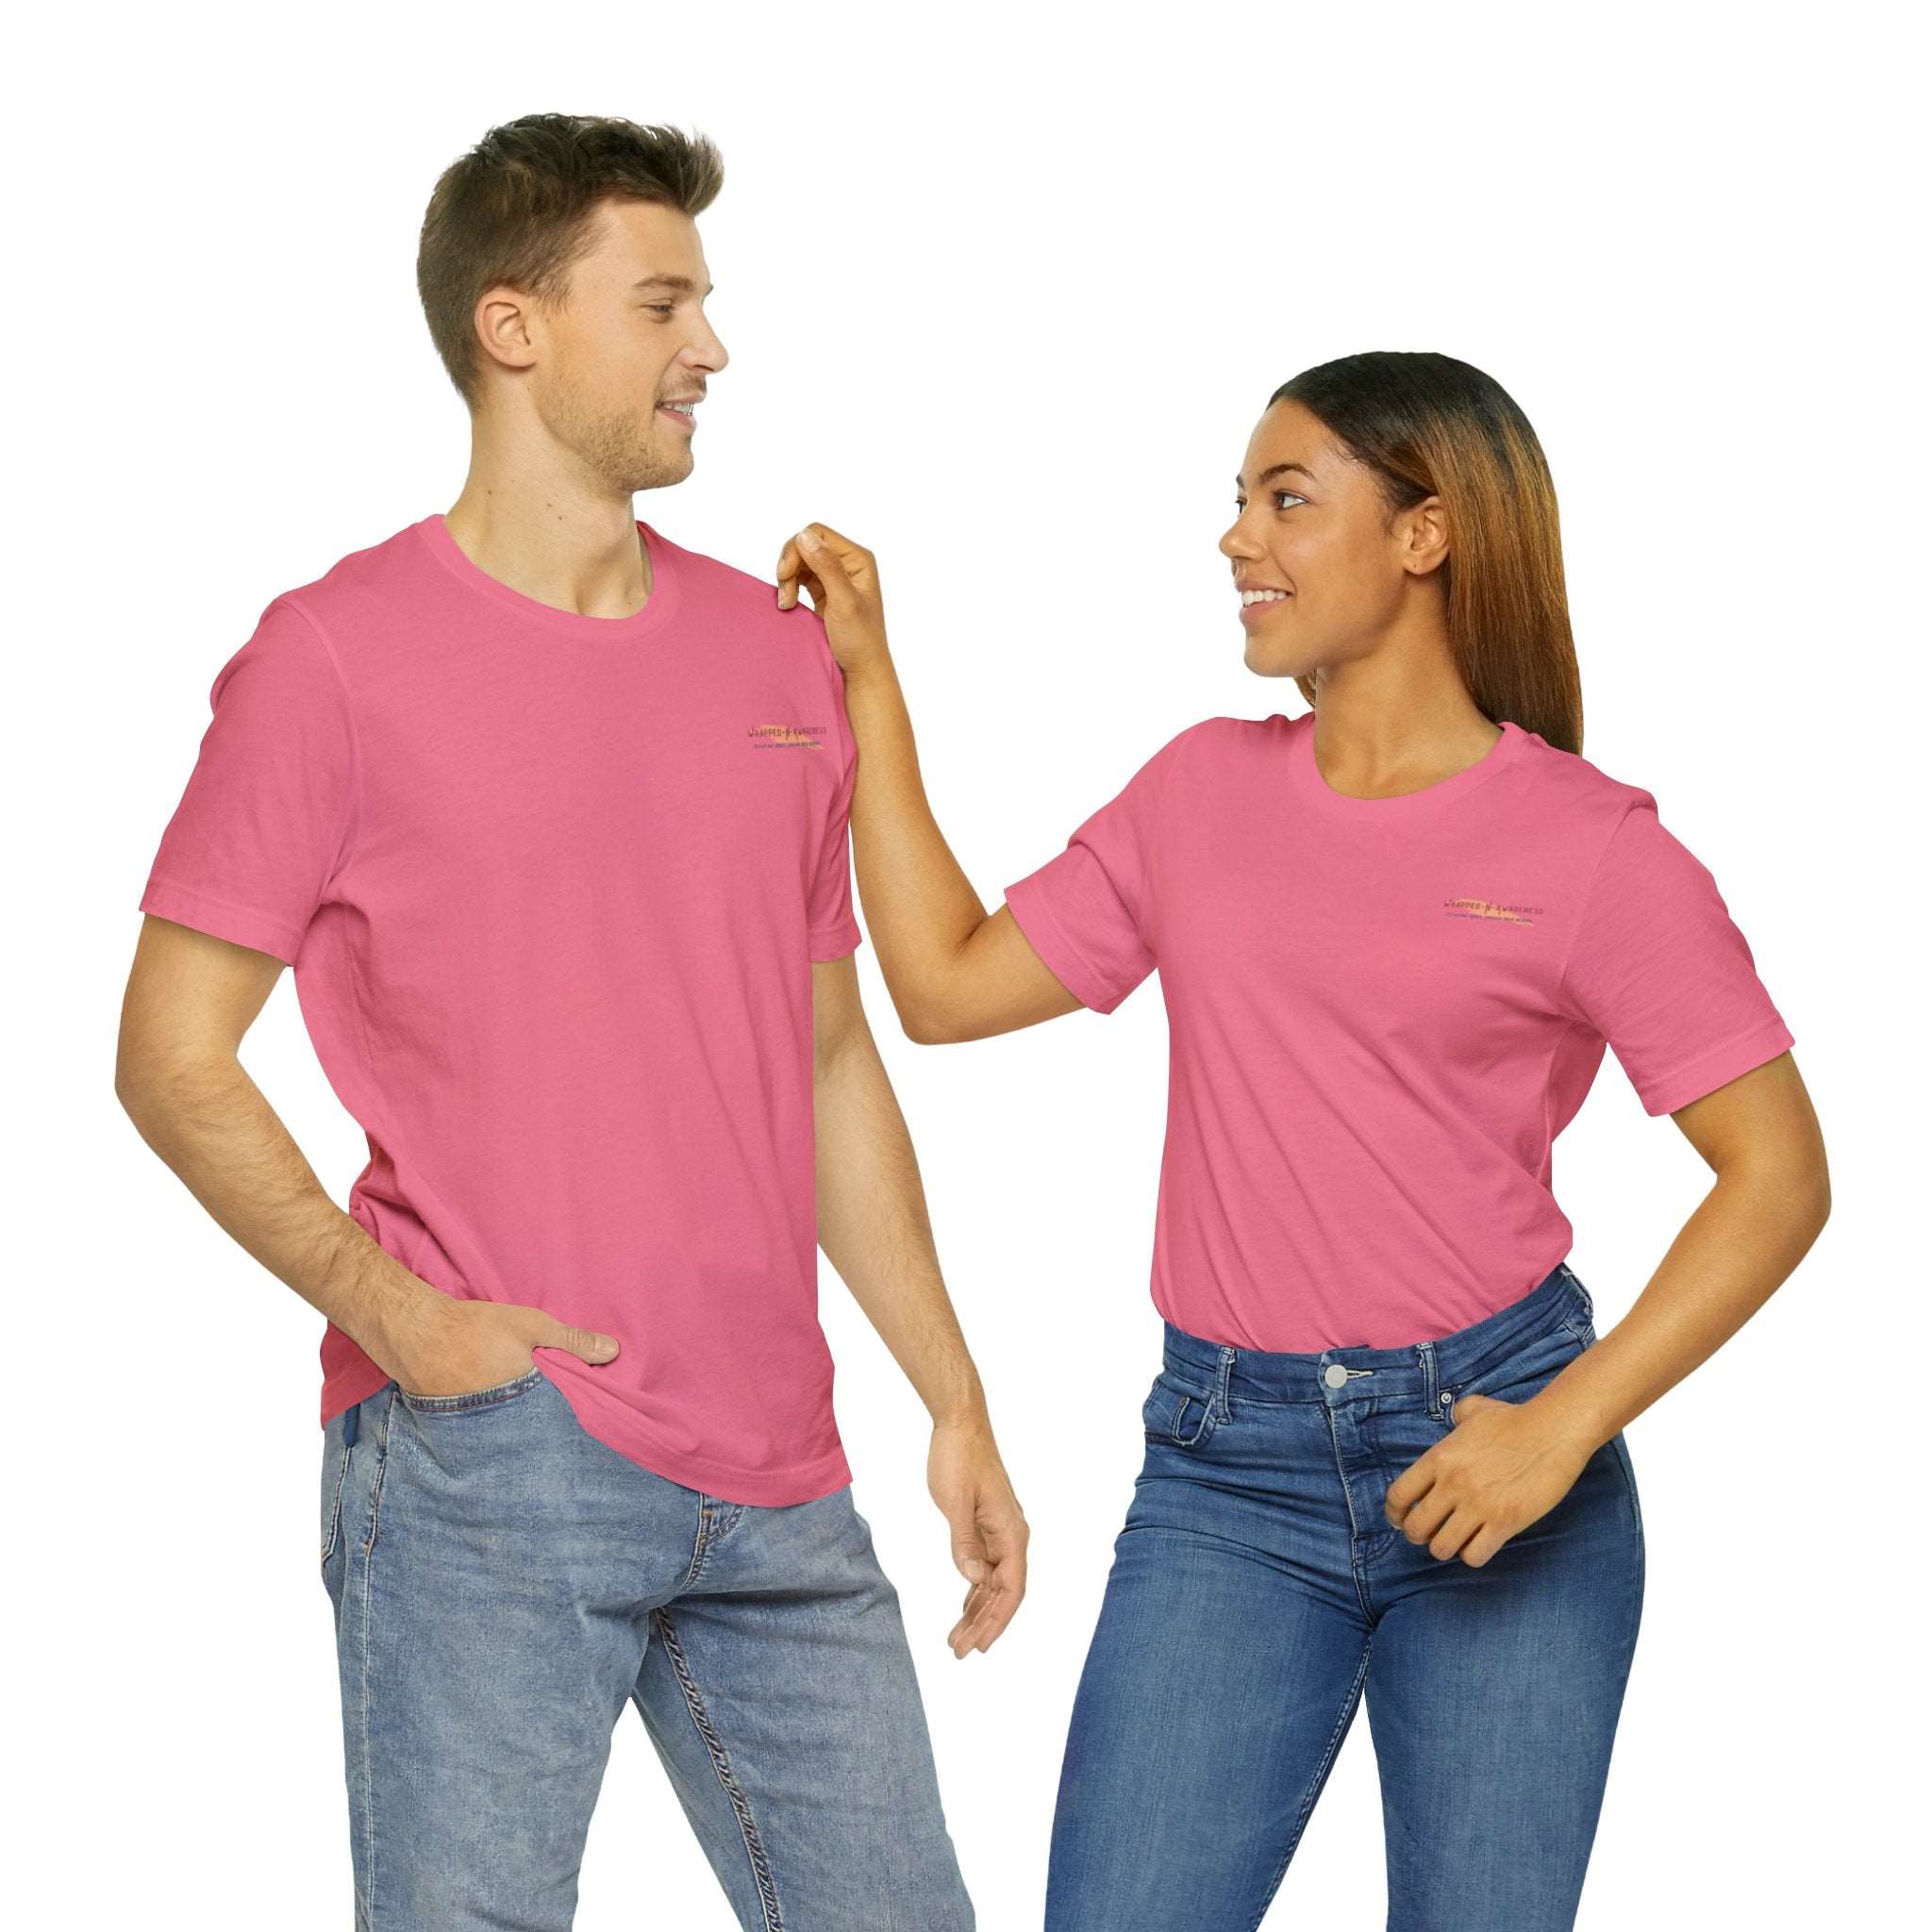 Brave Blossoms Jersey Tee - Bella+Canvas 3001 Charity Pink Classic Tee Comfortable Tee Cotton T-Shirt Graphic Tee JerseyTee Statement Shirt T-shirt Tee Unisex Apparel T-Shirt 12279822134437095494_2048_f9545cdb-9aa5-485b-a01c-a9a54846a919 Printify